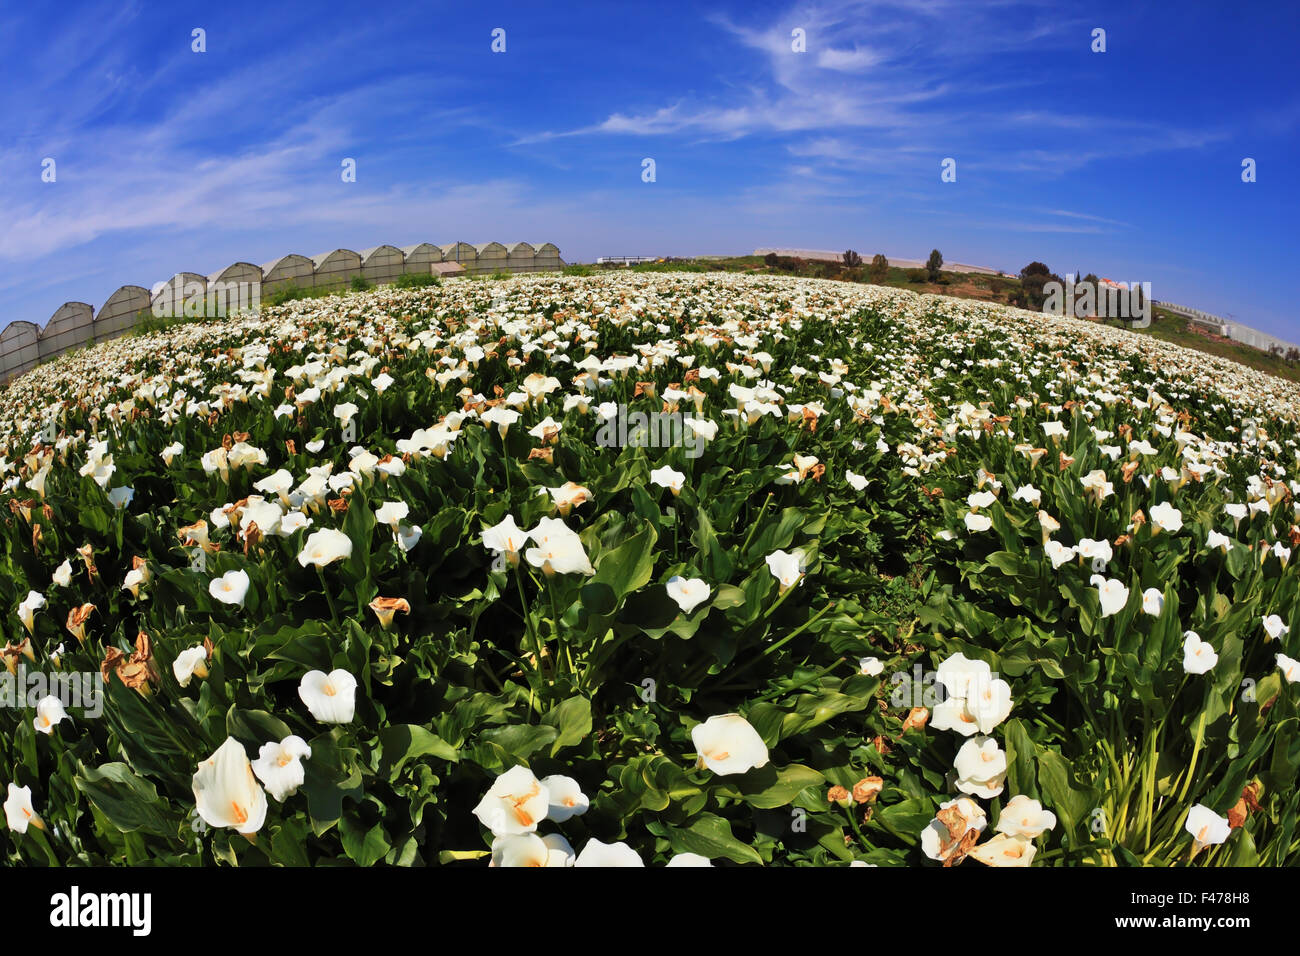 Big pictorial field of large white flowers Stock Photo